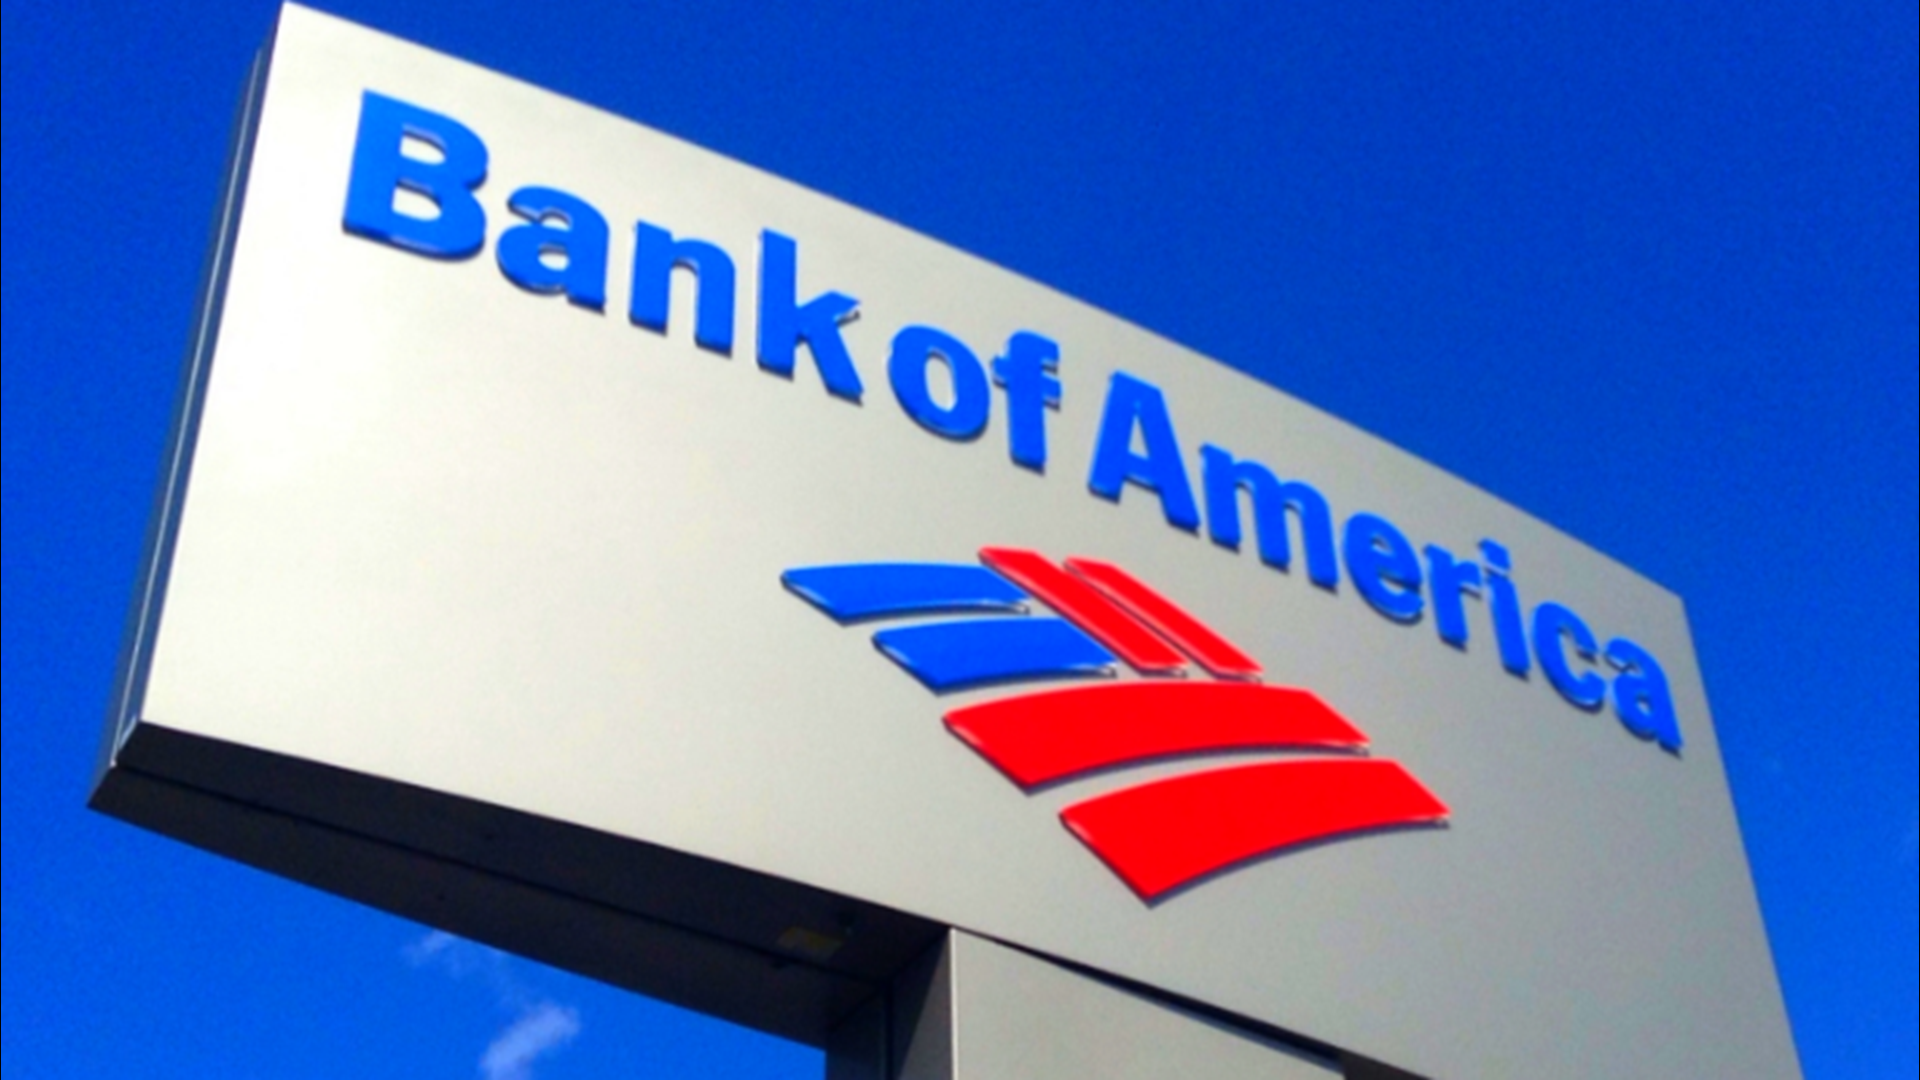 A class-action lawsuit claims Bank of America promised ‘zero-liability to EDD card holders’ but isn’t delivering, or protecting card holders.